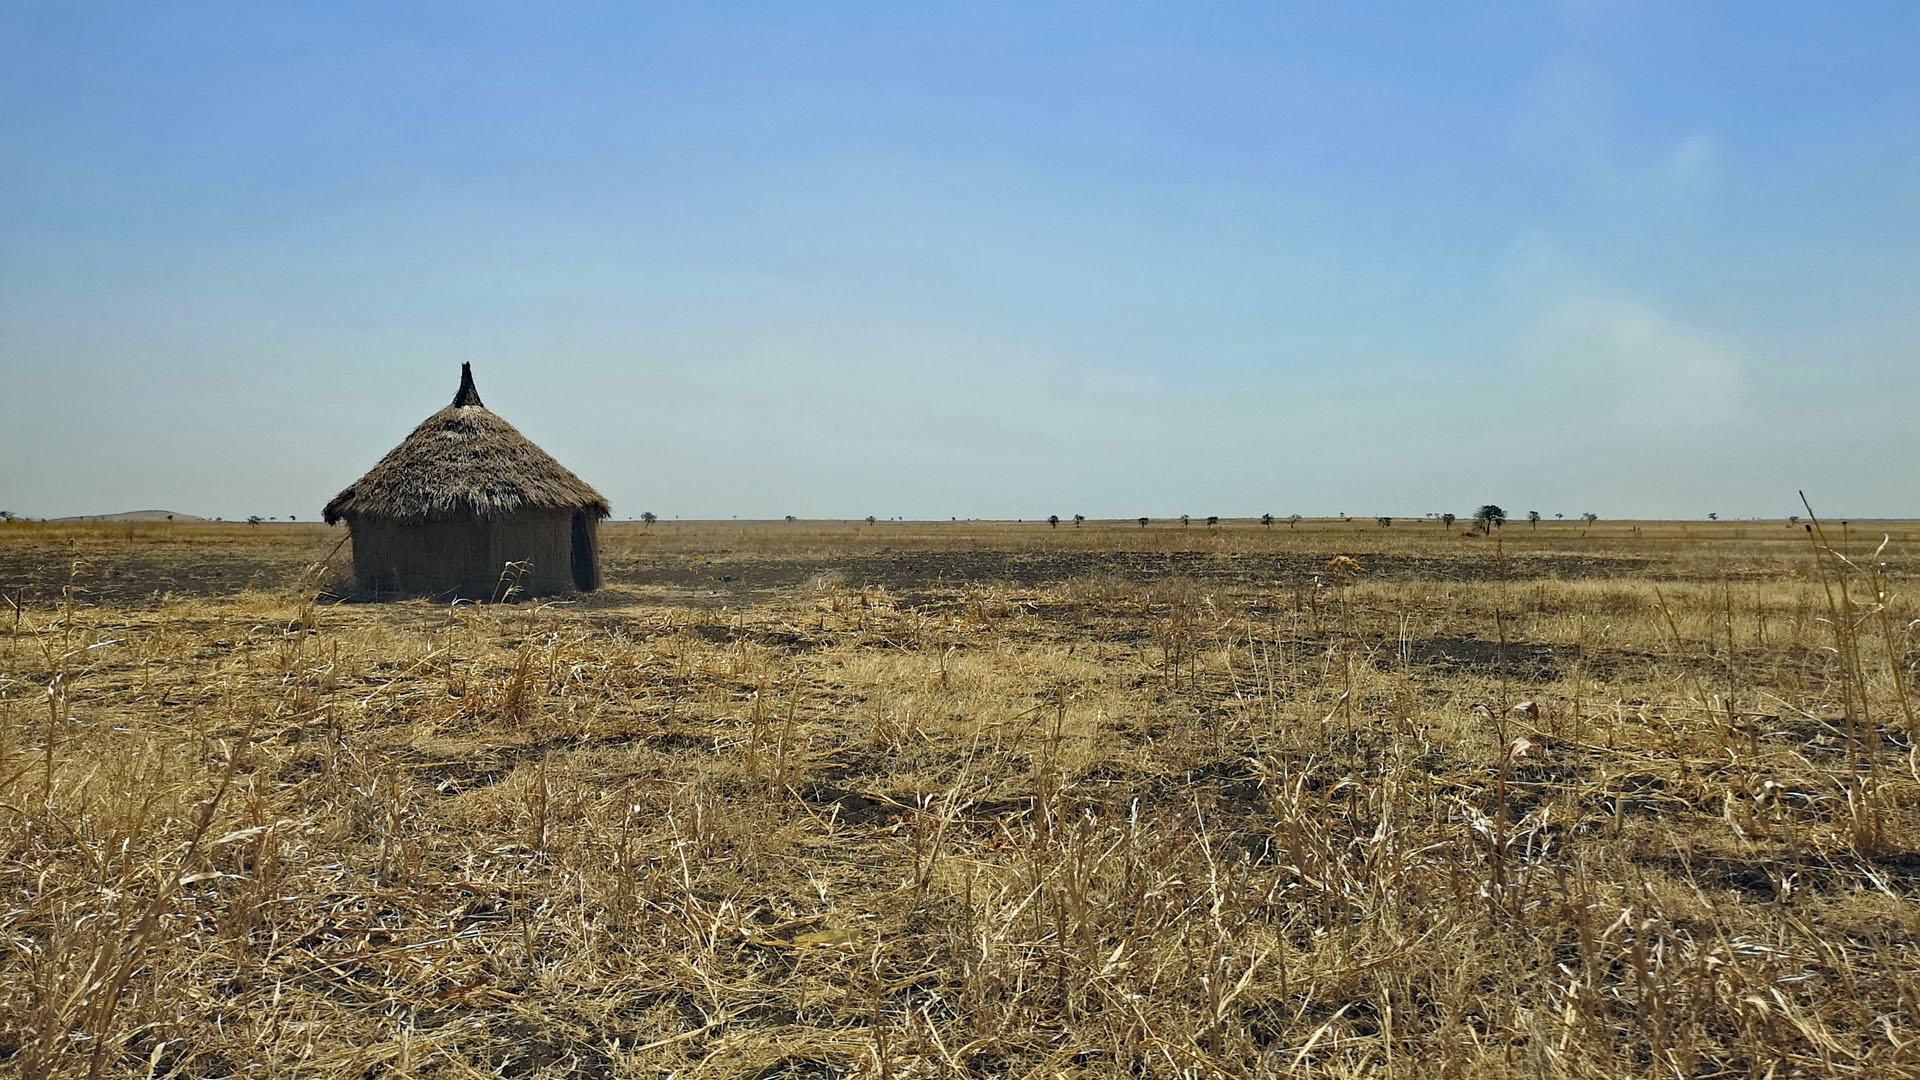 arid grasses and flat plants in the foreground, a small straw-roofed building on the left, blue sky and a wide horizon